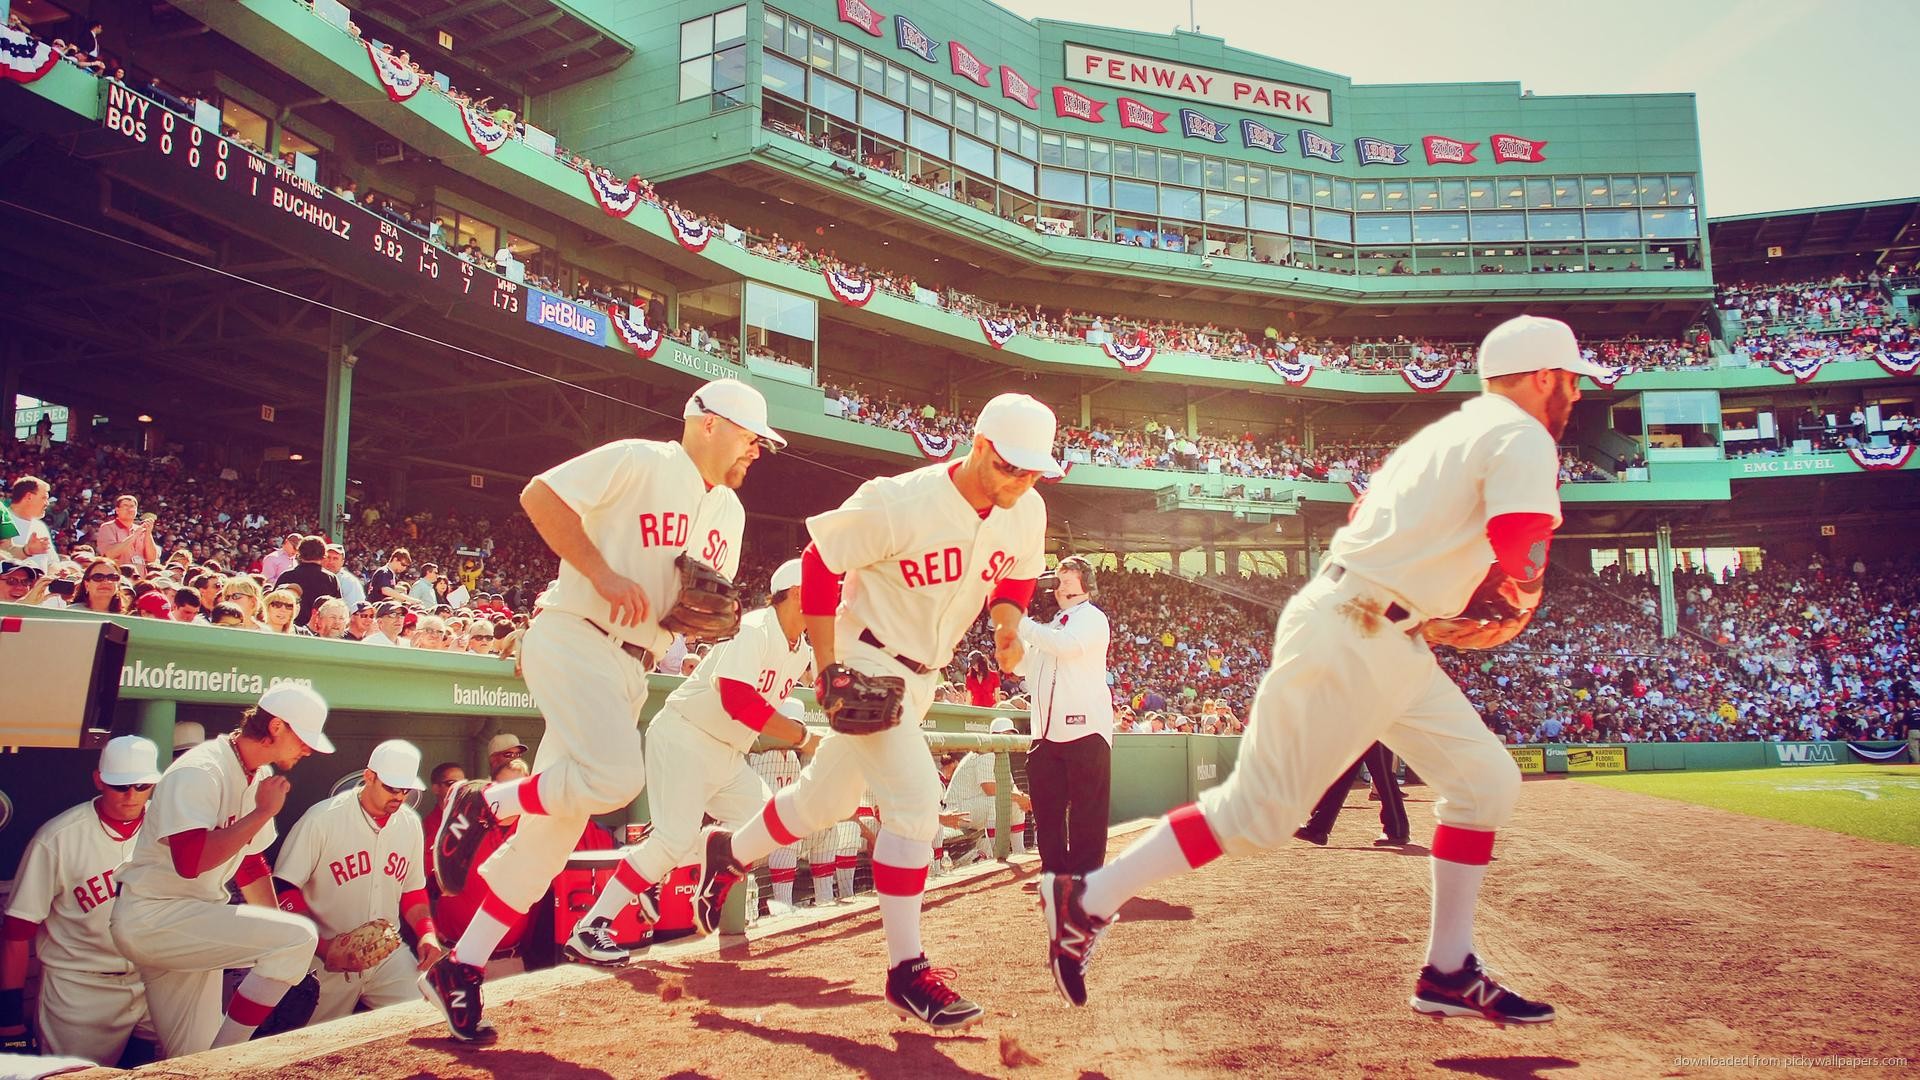 Fenway park with classic jerseys